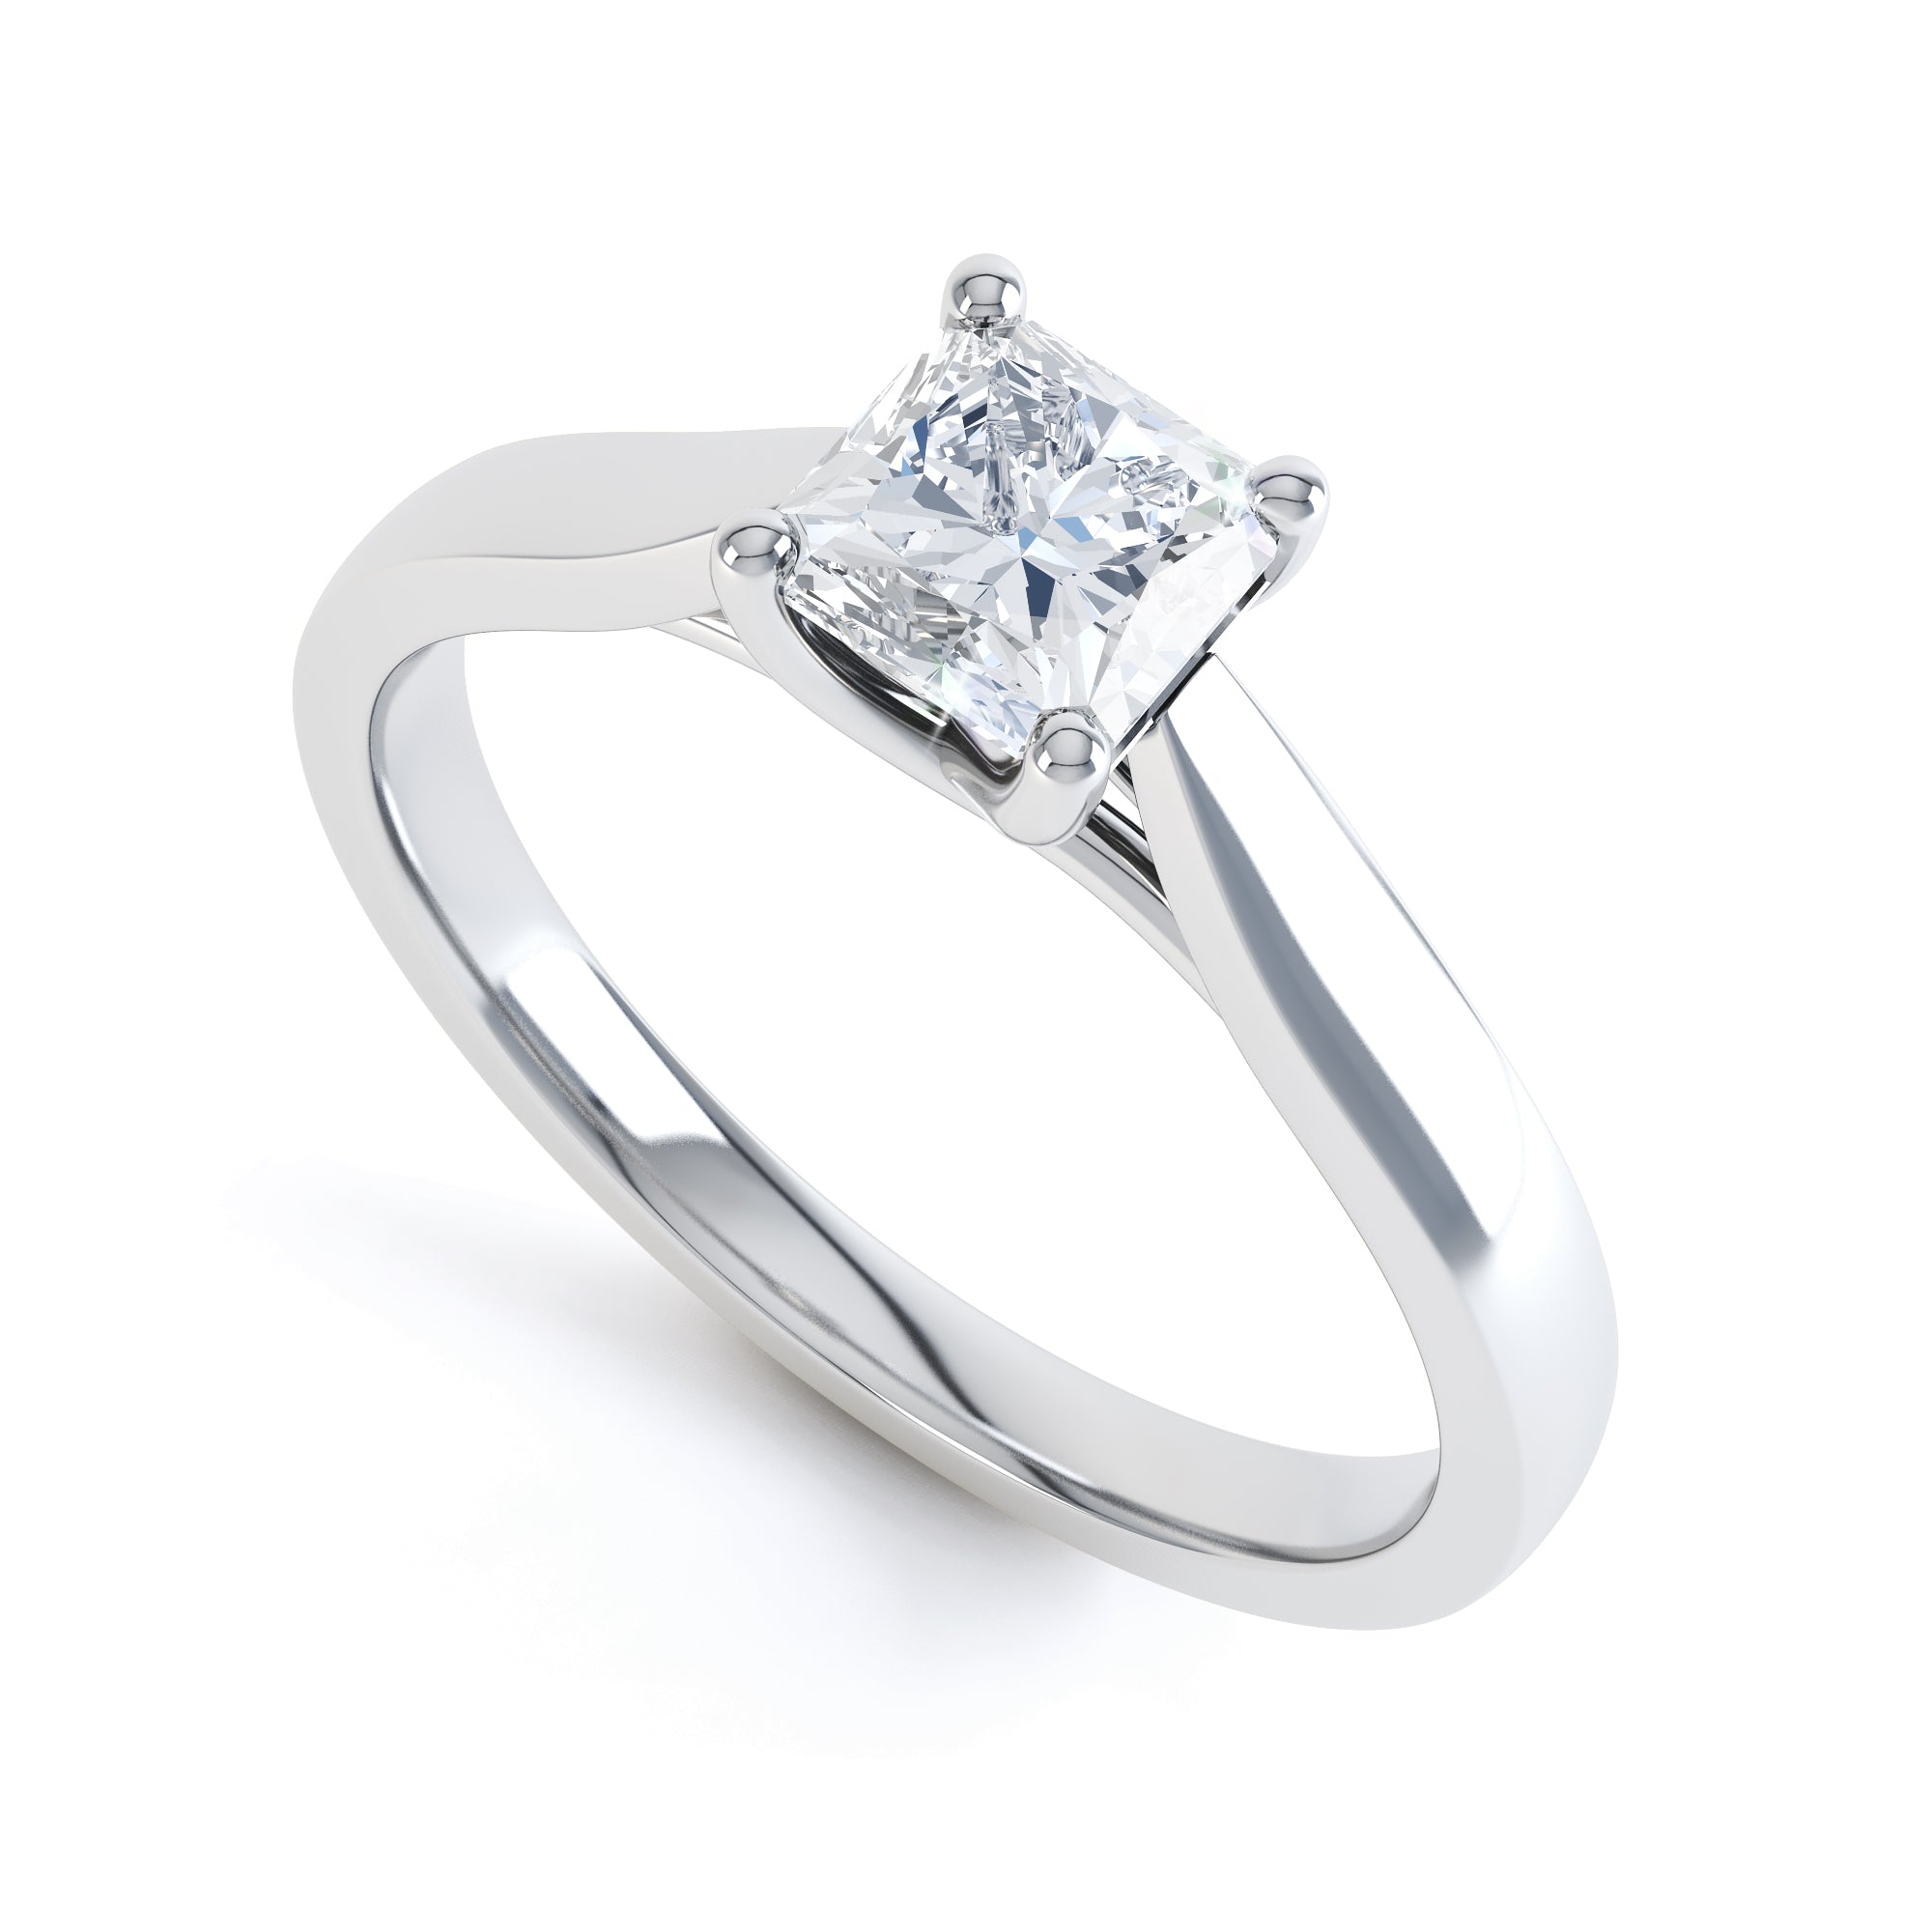 Radiant Cut Centre Stone, 4 claw, Diamond Engagement Ring with Tapered Shoulders